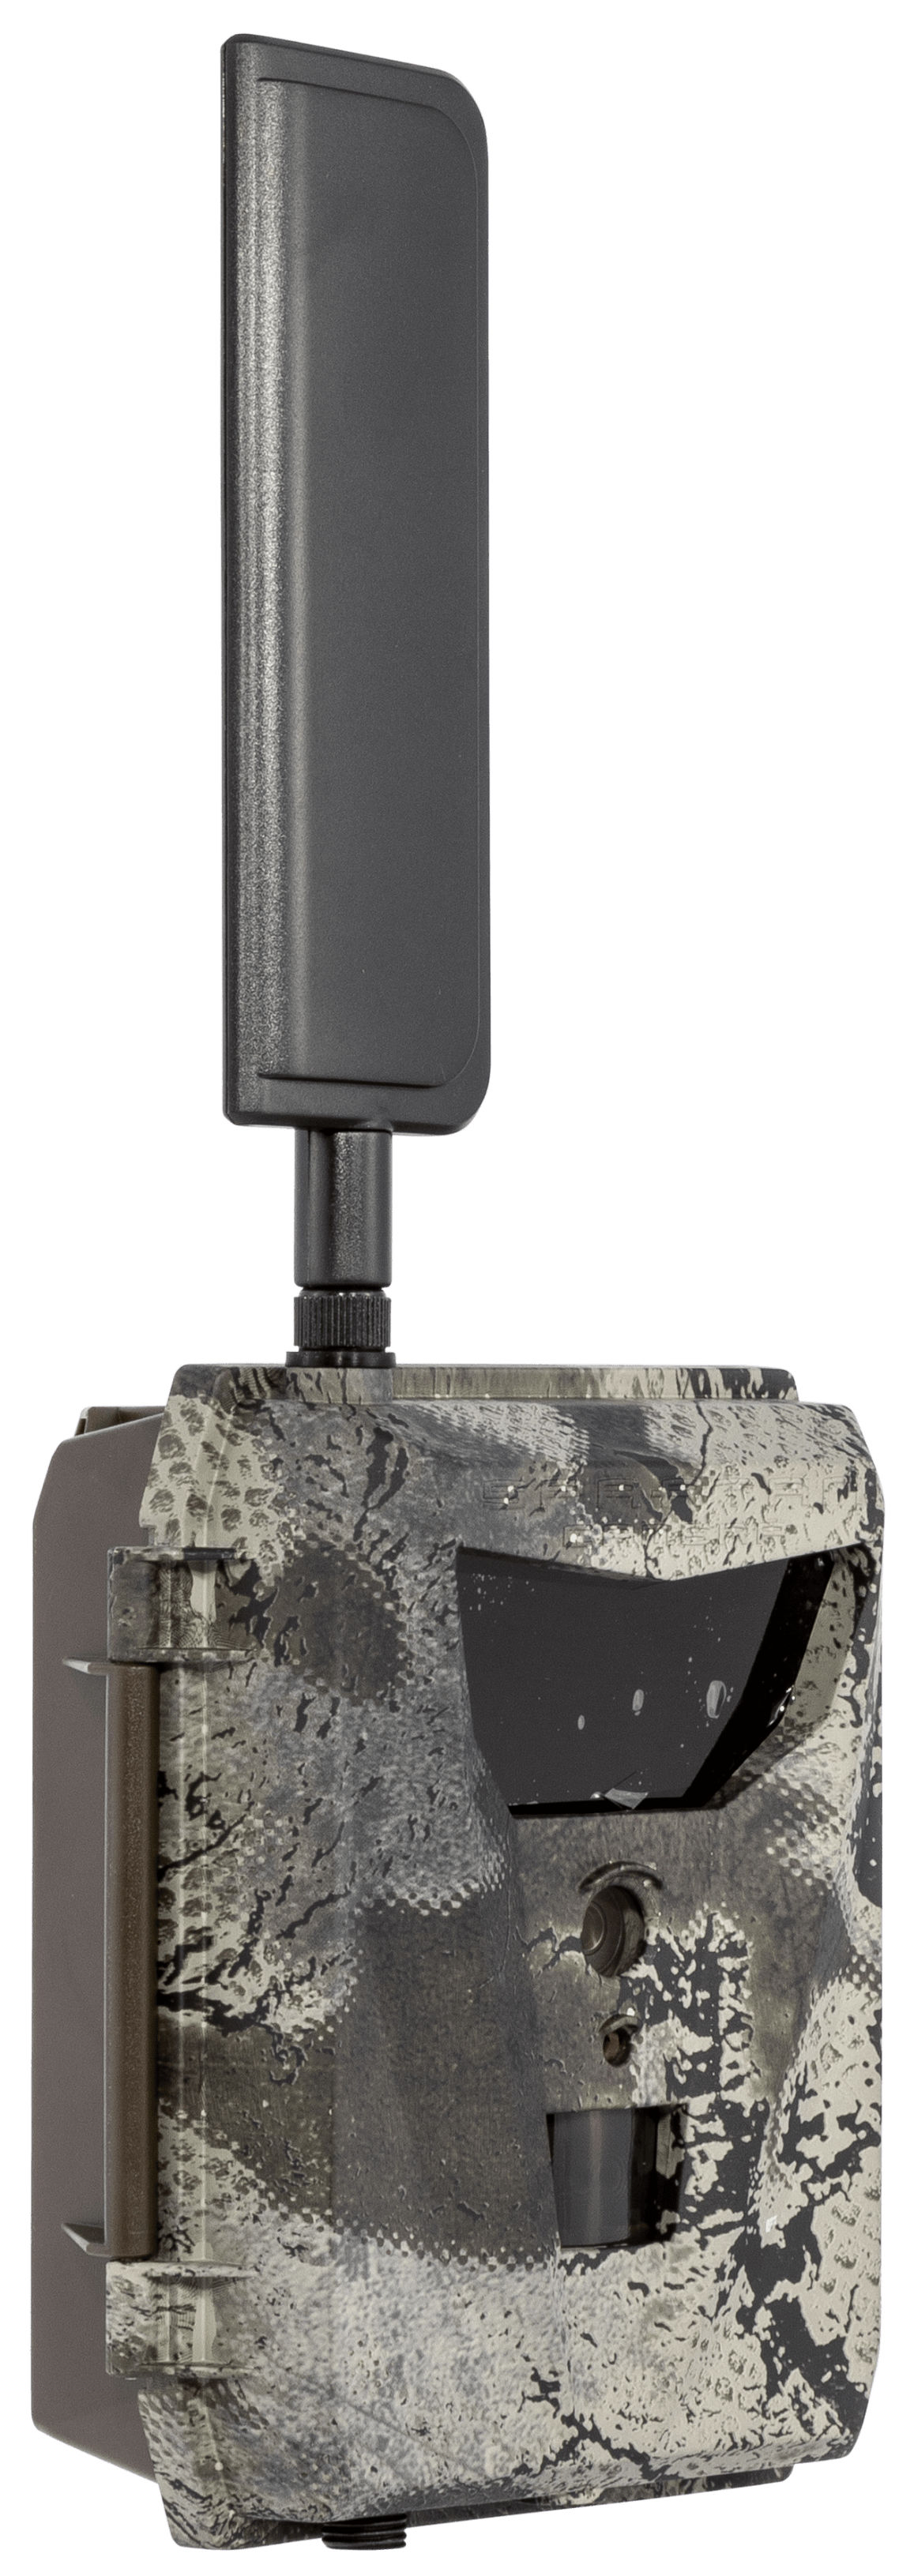 Hco Outdoor Products Spartan Ghost Blackout Cellular Trail Camera Black Verizon 4g/lte Game Cameras and Accessories